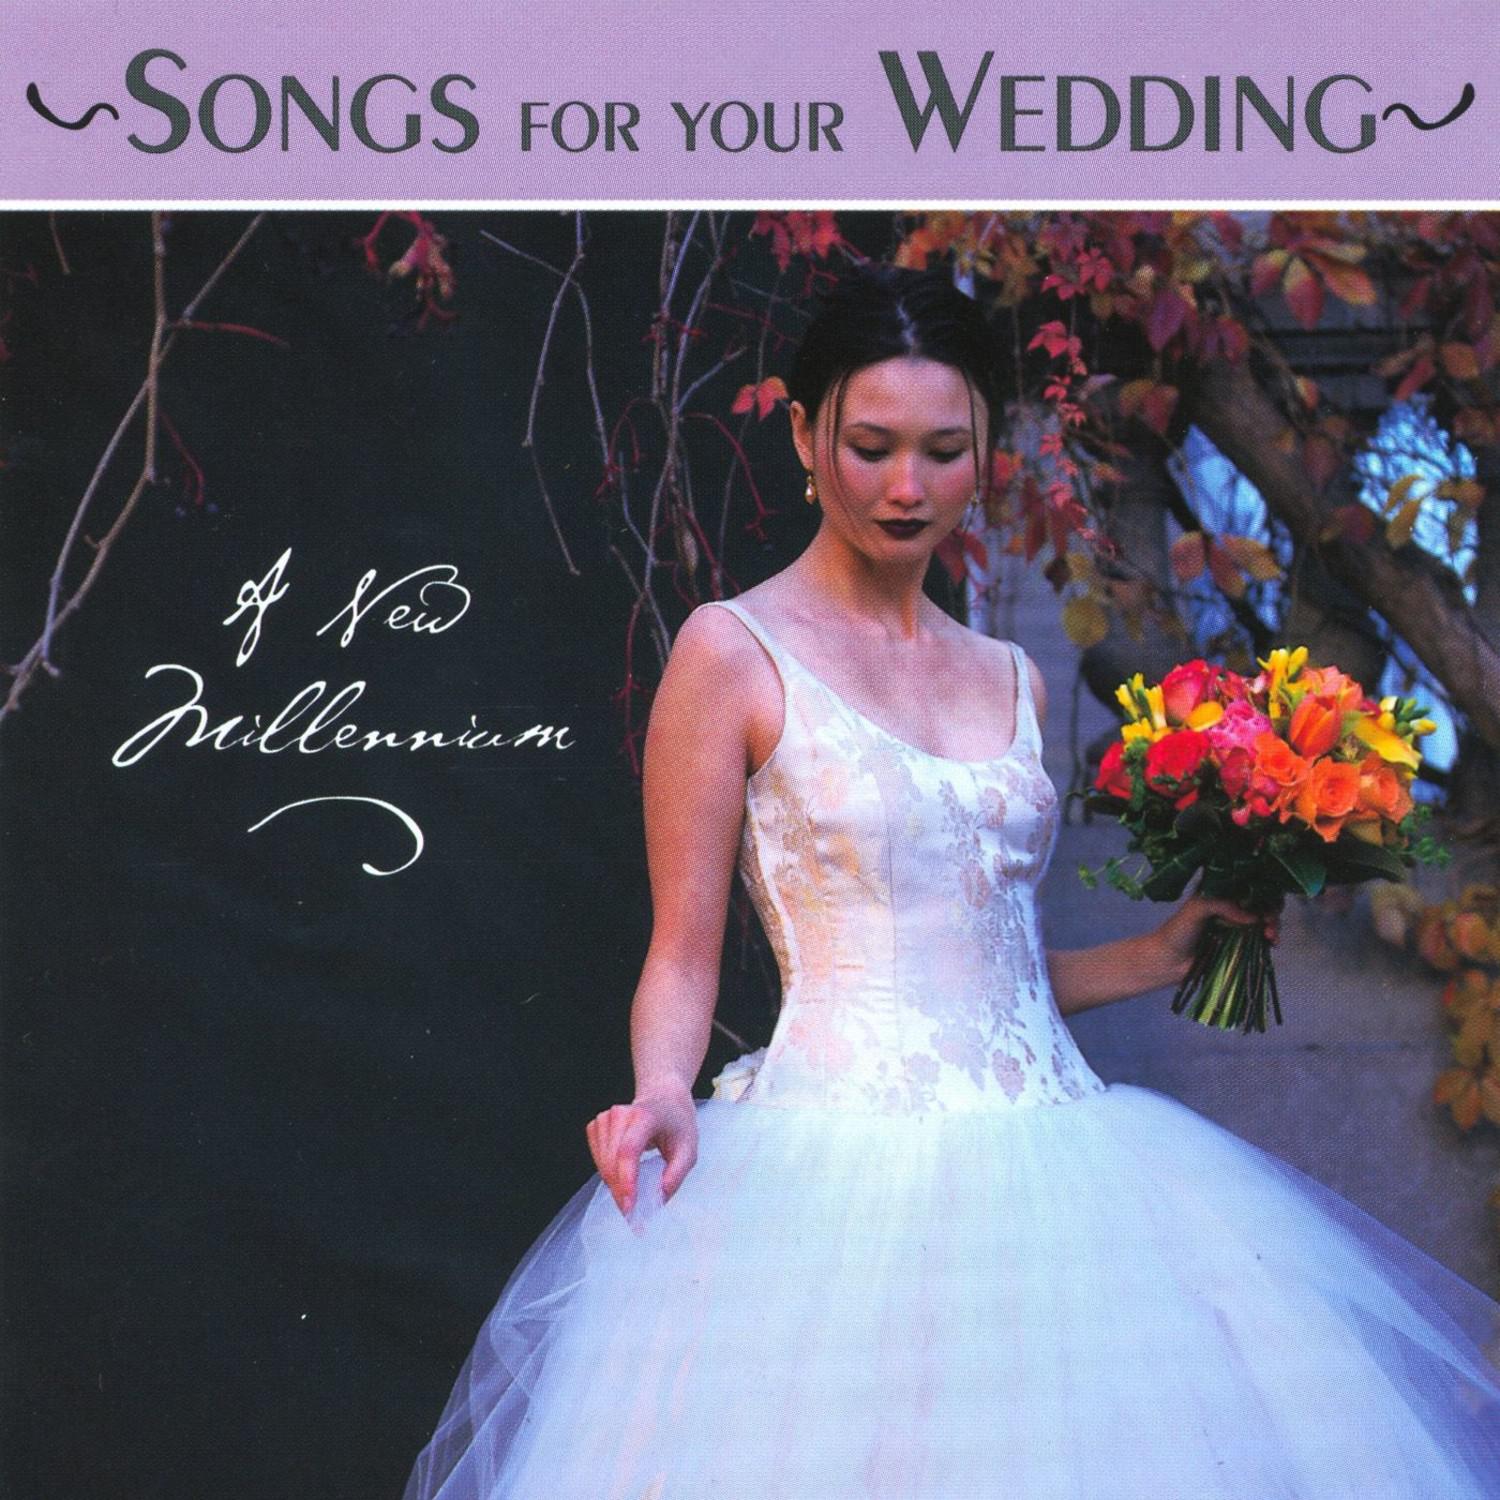 Songs For Your Wedding - A New Millennium